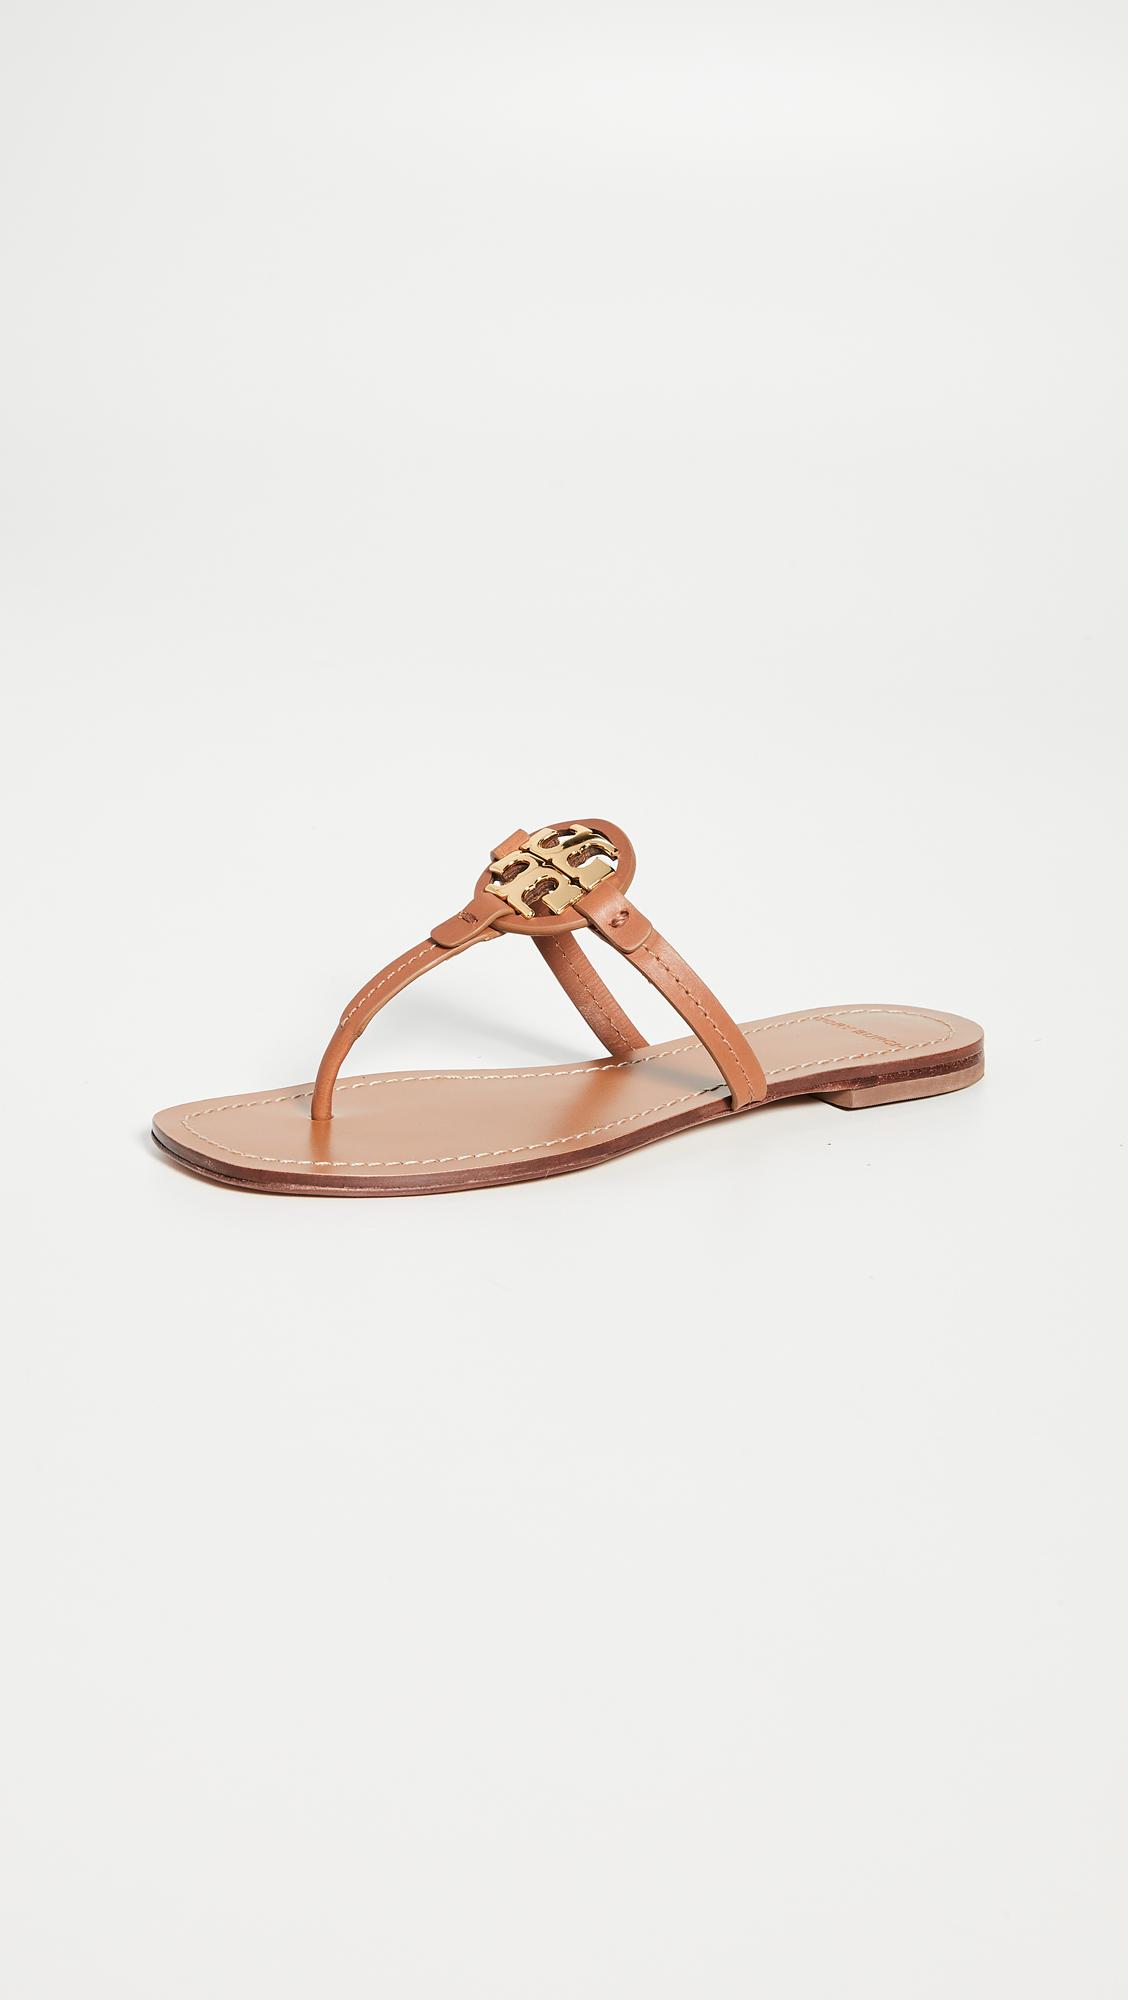 Tory Burch Mini Miller Leather Thong Sandals - Lyst